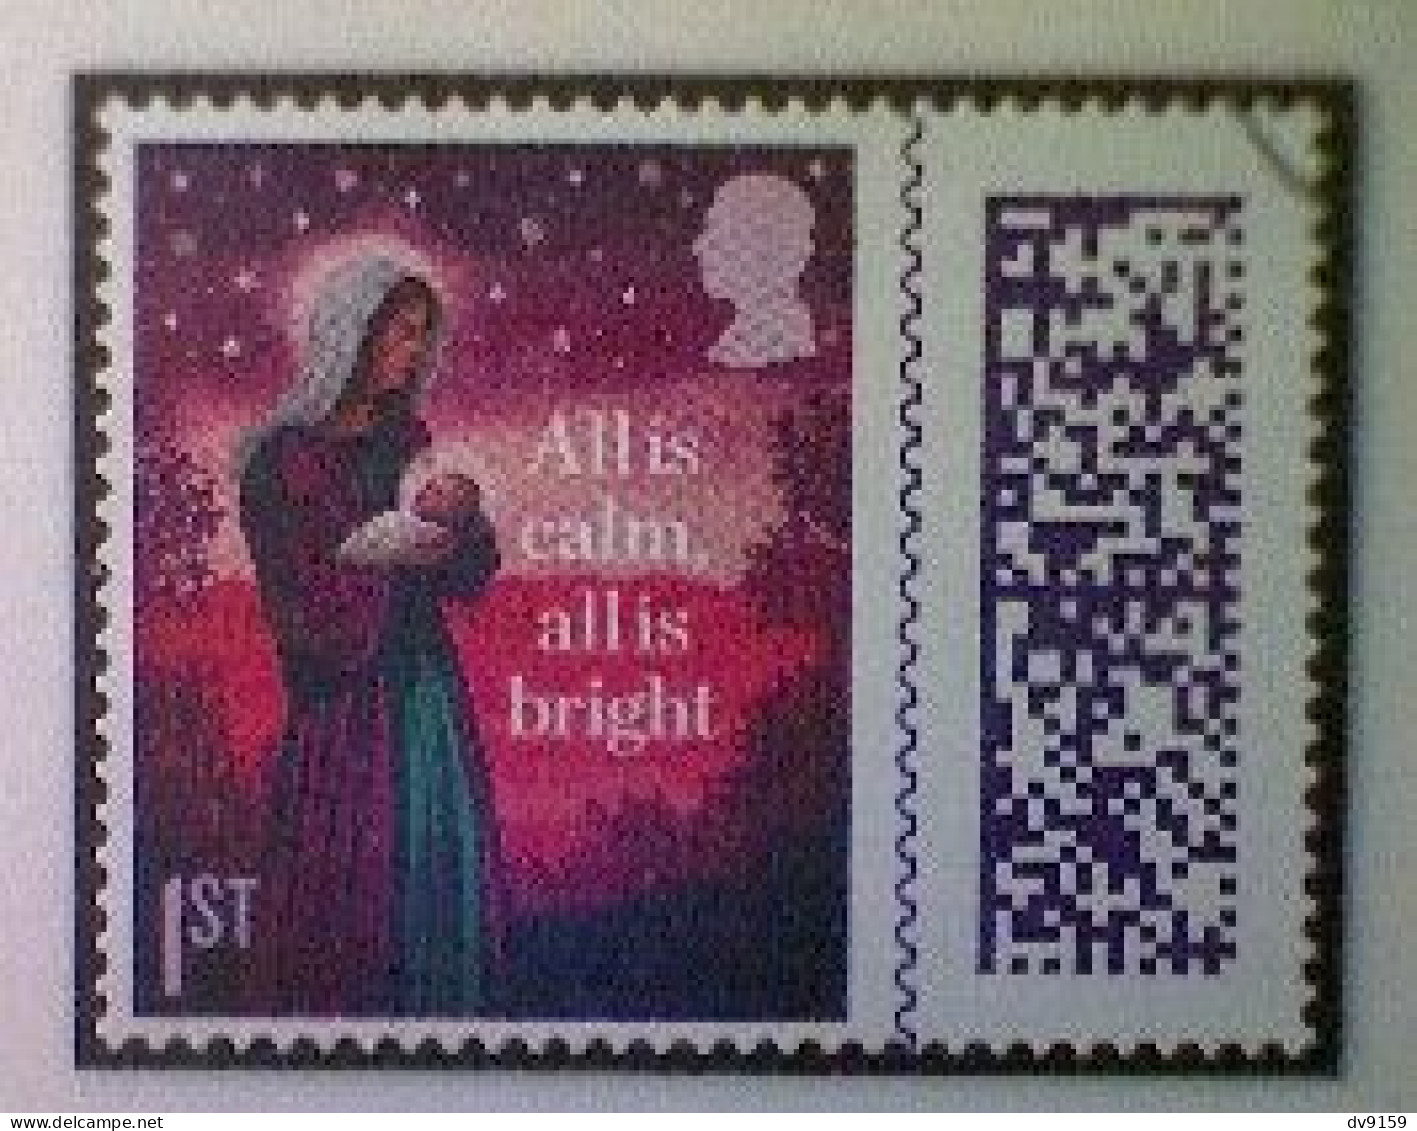 Great Britain, Scott #4444, Used(o), 2023, Traditional Christmas, 1st, Multicolored - Oblitérés